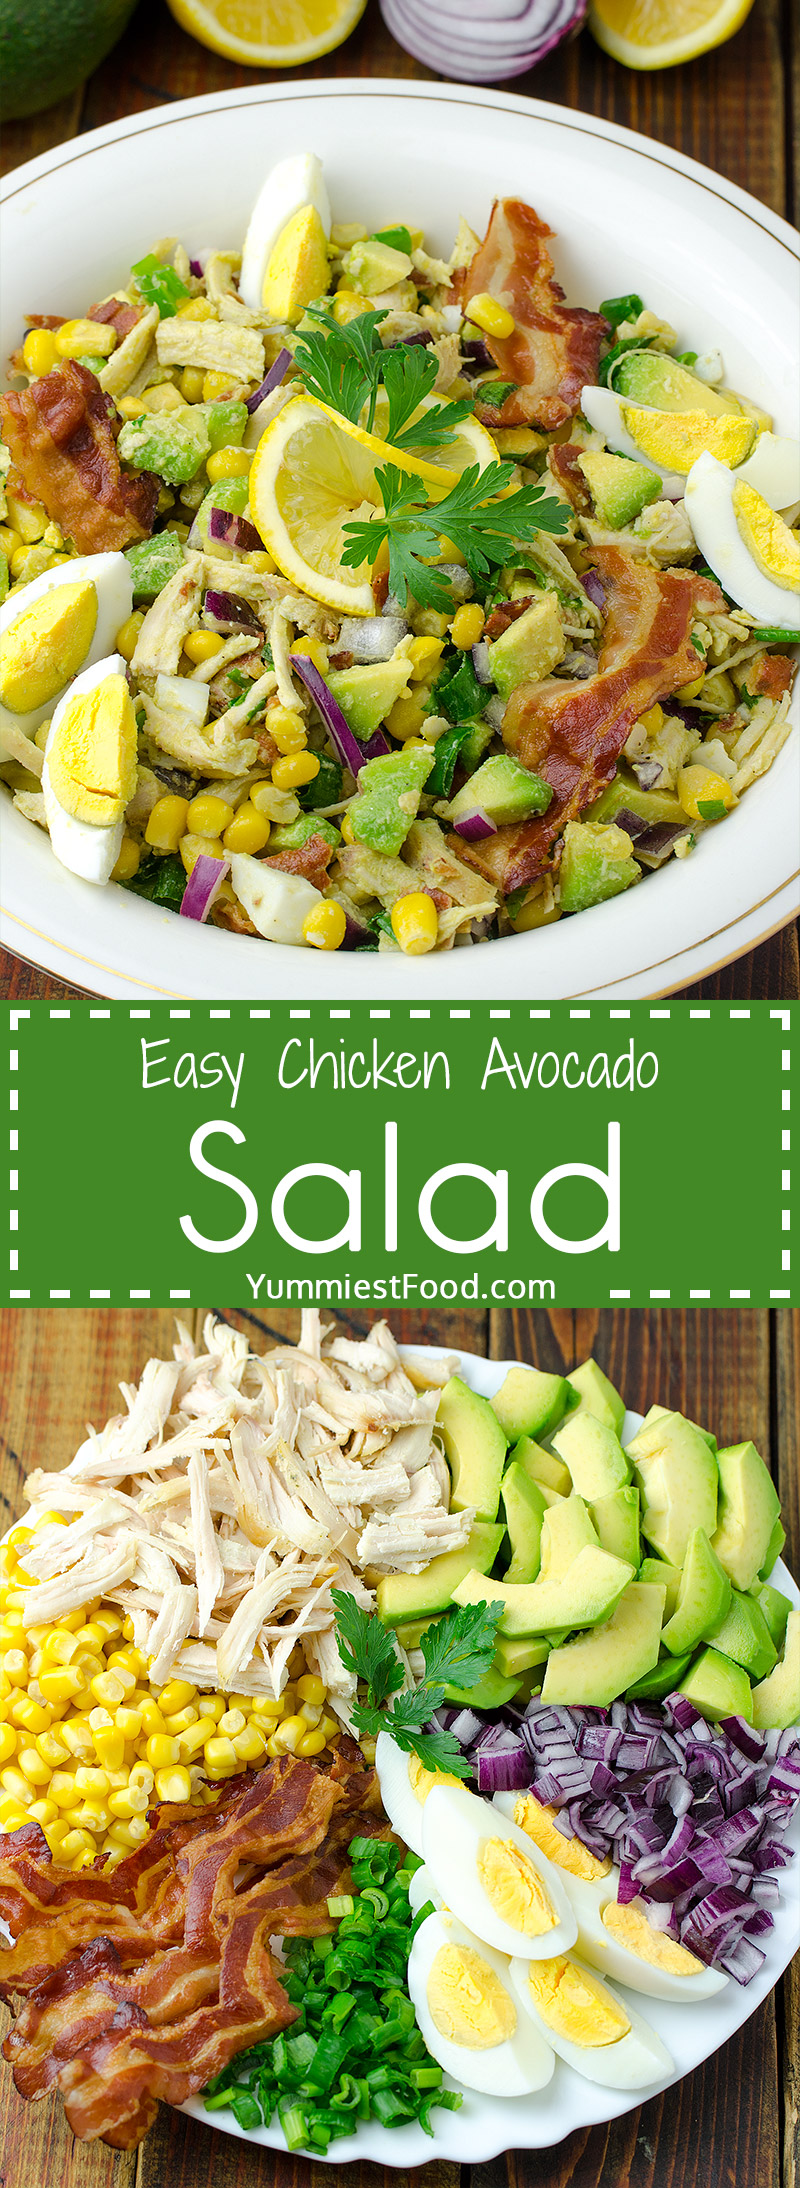 EASY CHICKEN AVOCADO SALAD - A perfect salad to throw together at any time of the day with No Cooking